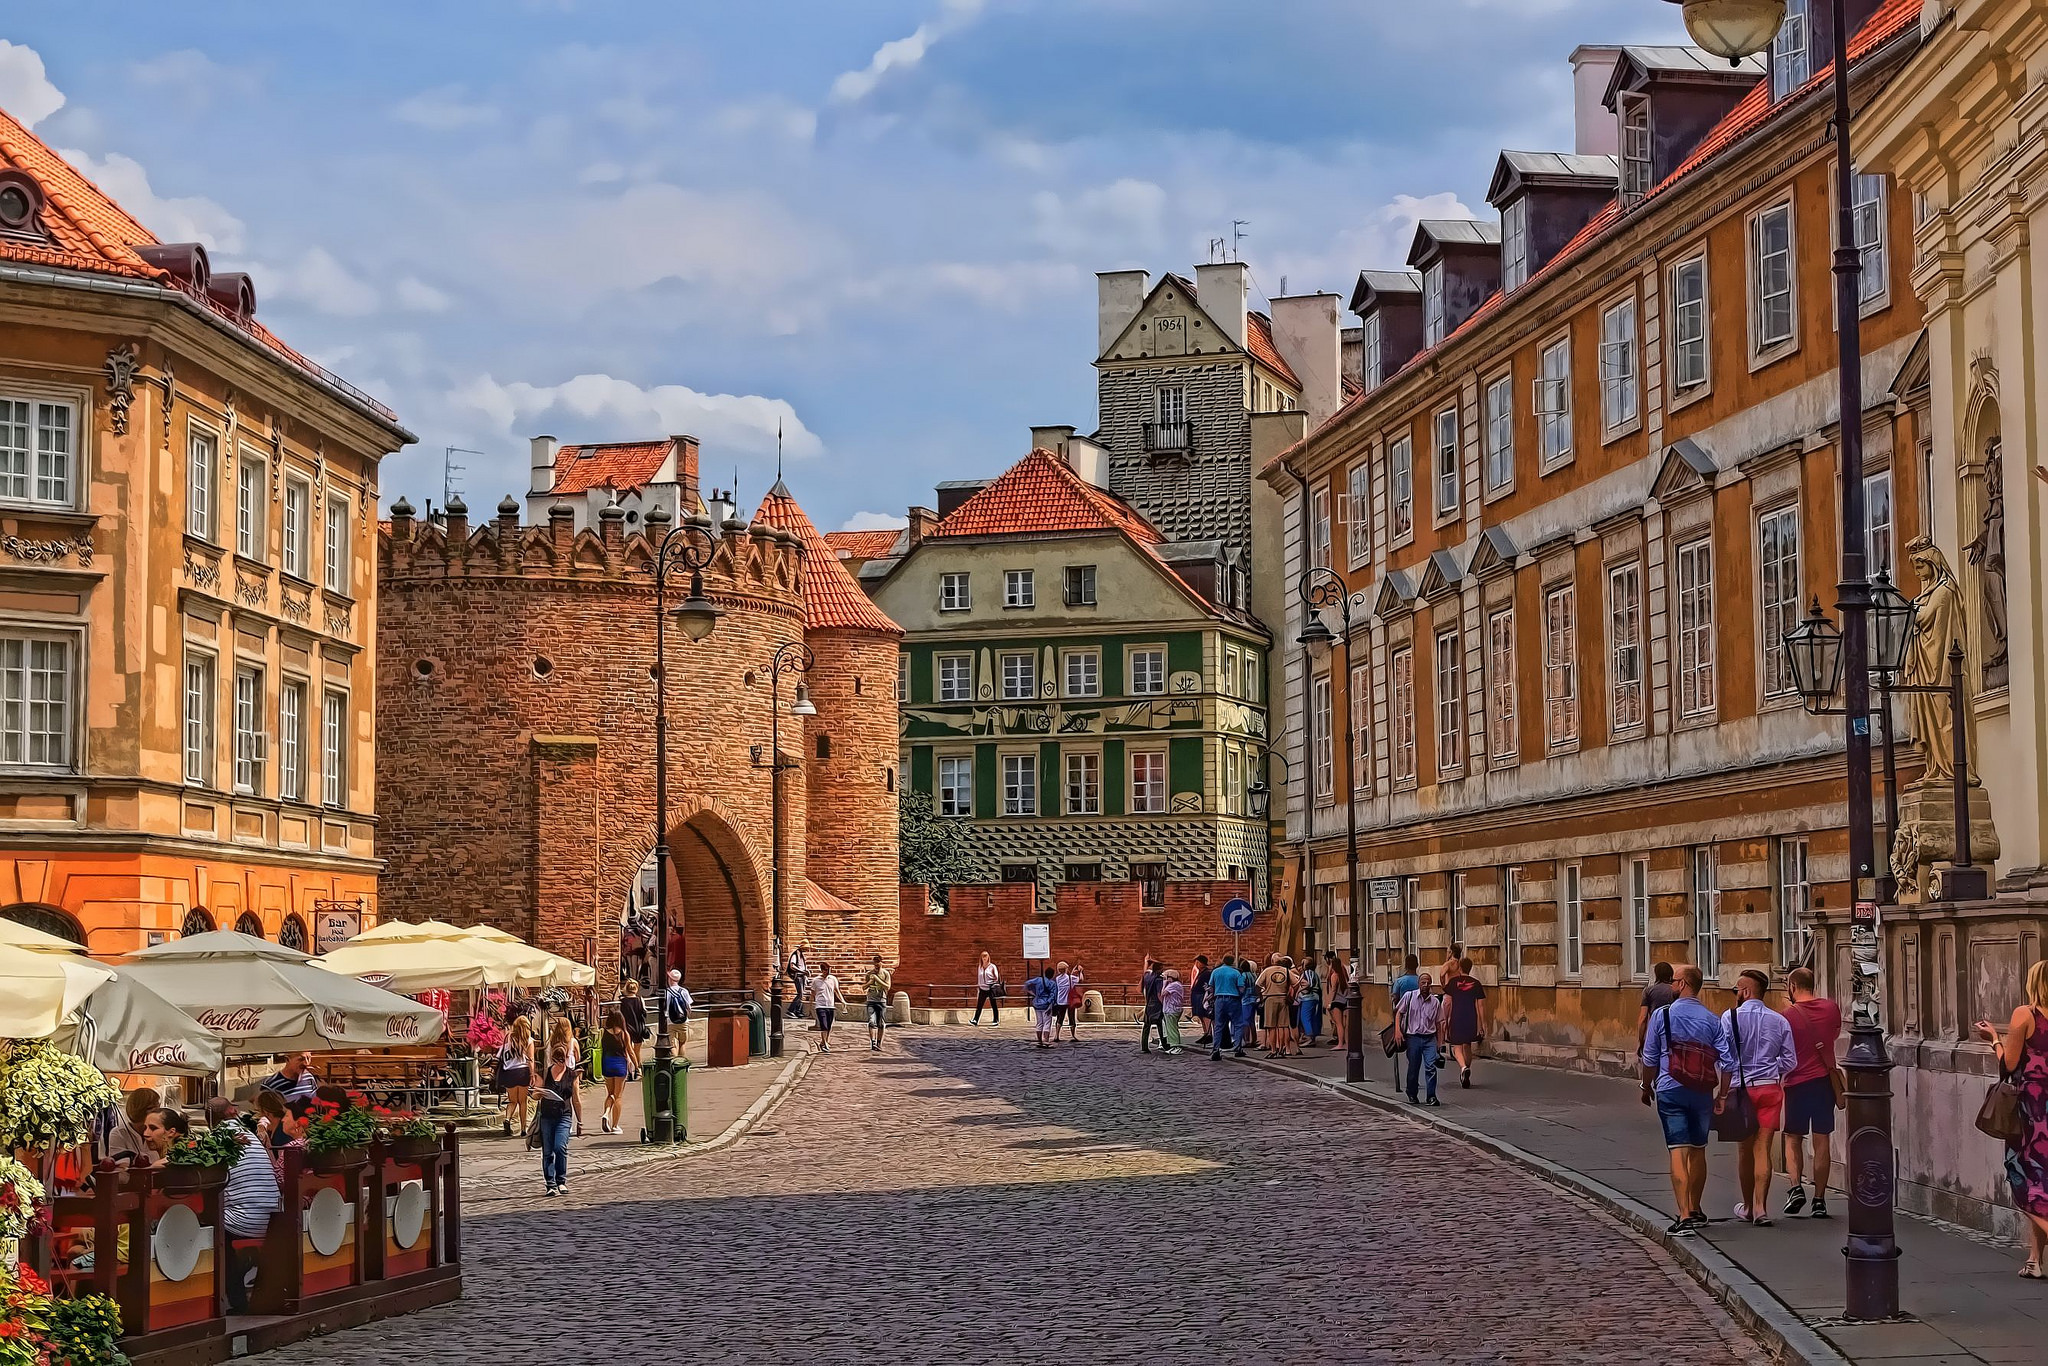 poland, street, man made, warsaw, architecture, building, city, people, cities